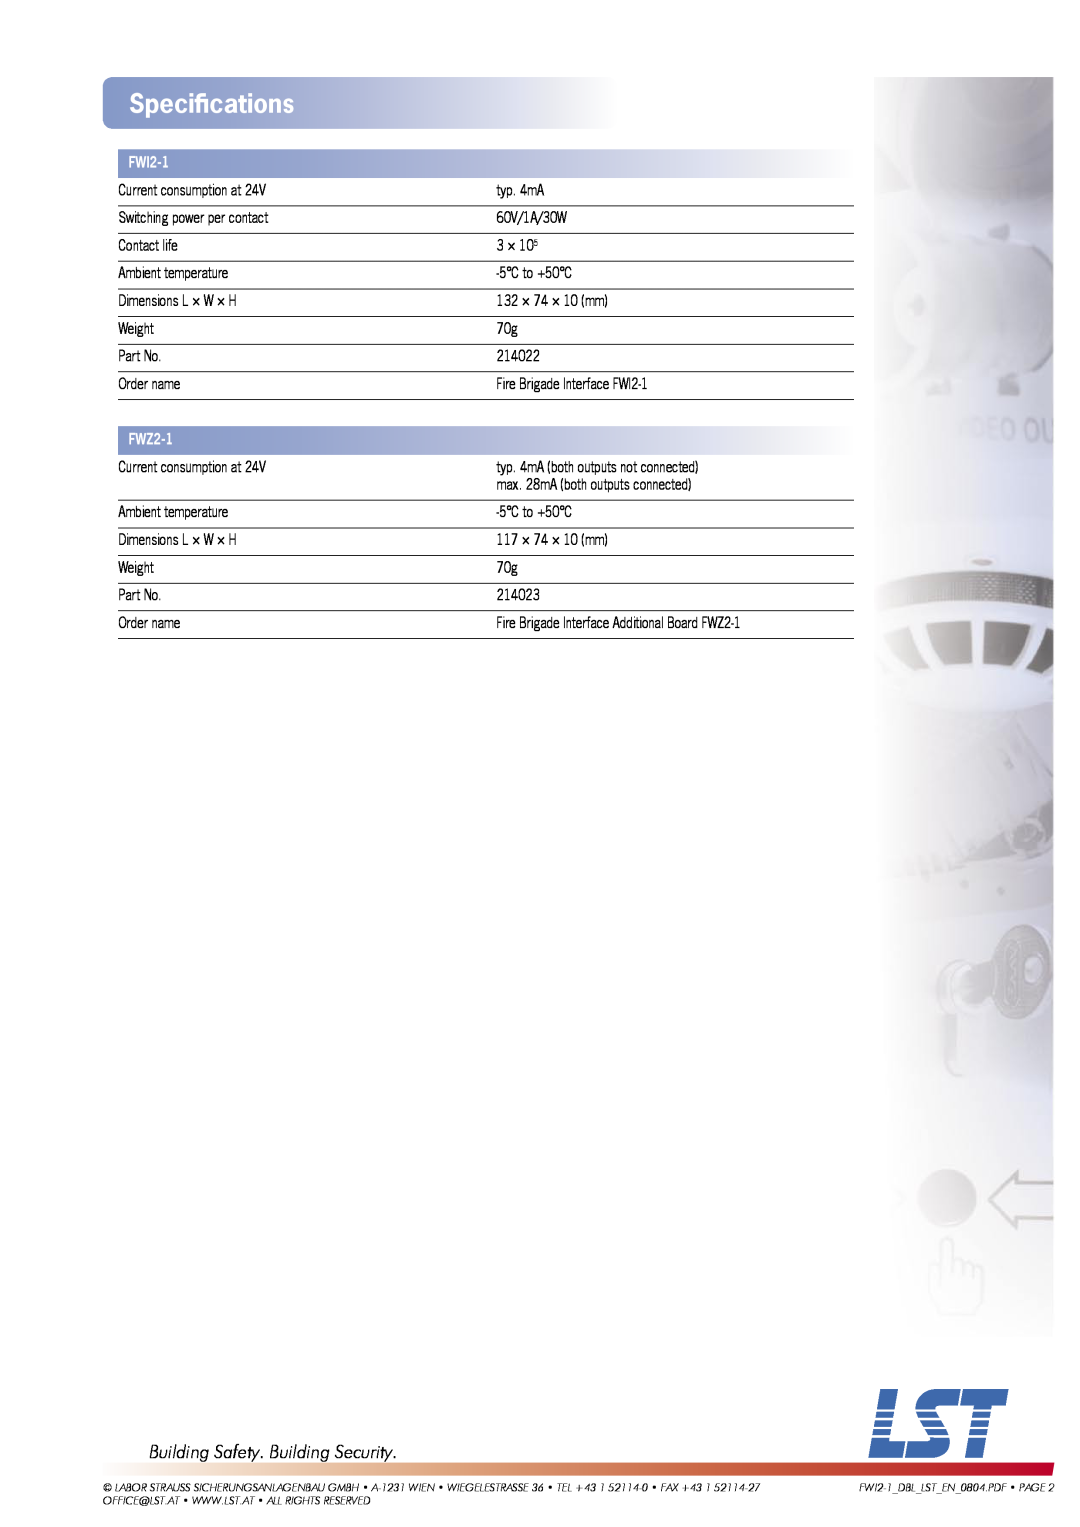 LST FWZ2-1 manual Speciﬁcations, Building Safety. Building Security, FWI2-1 